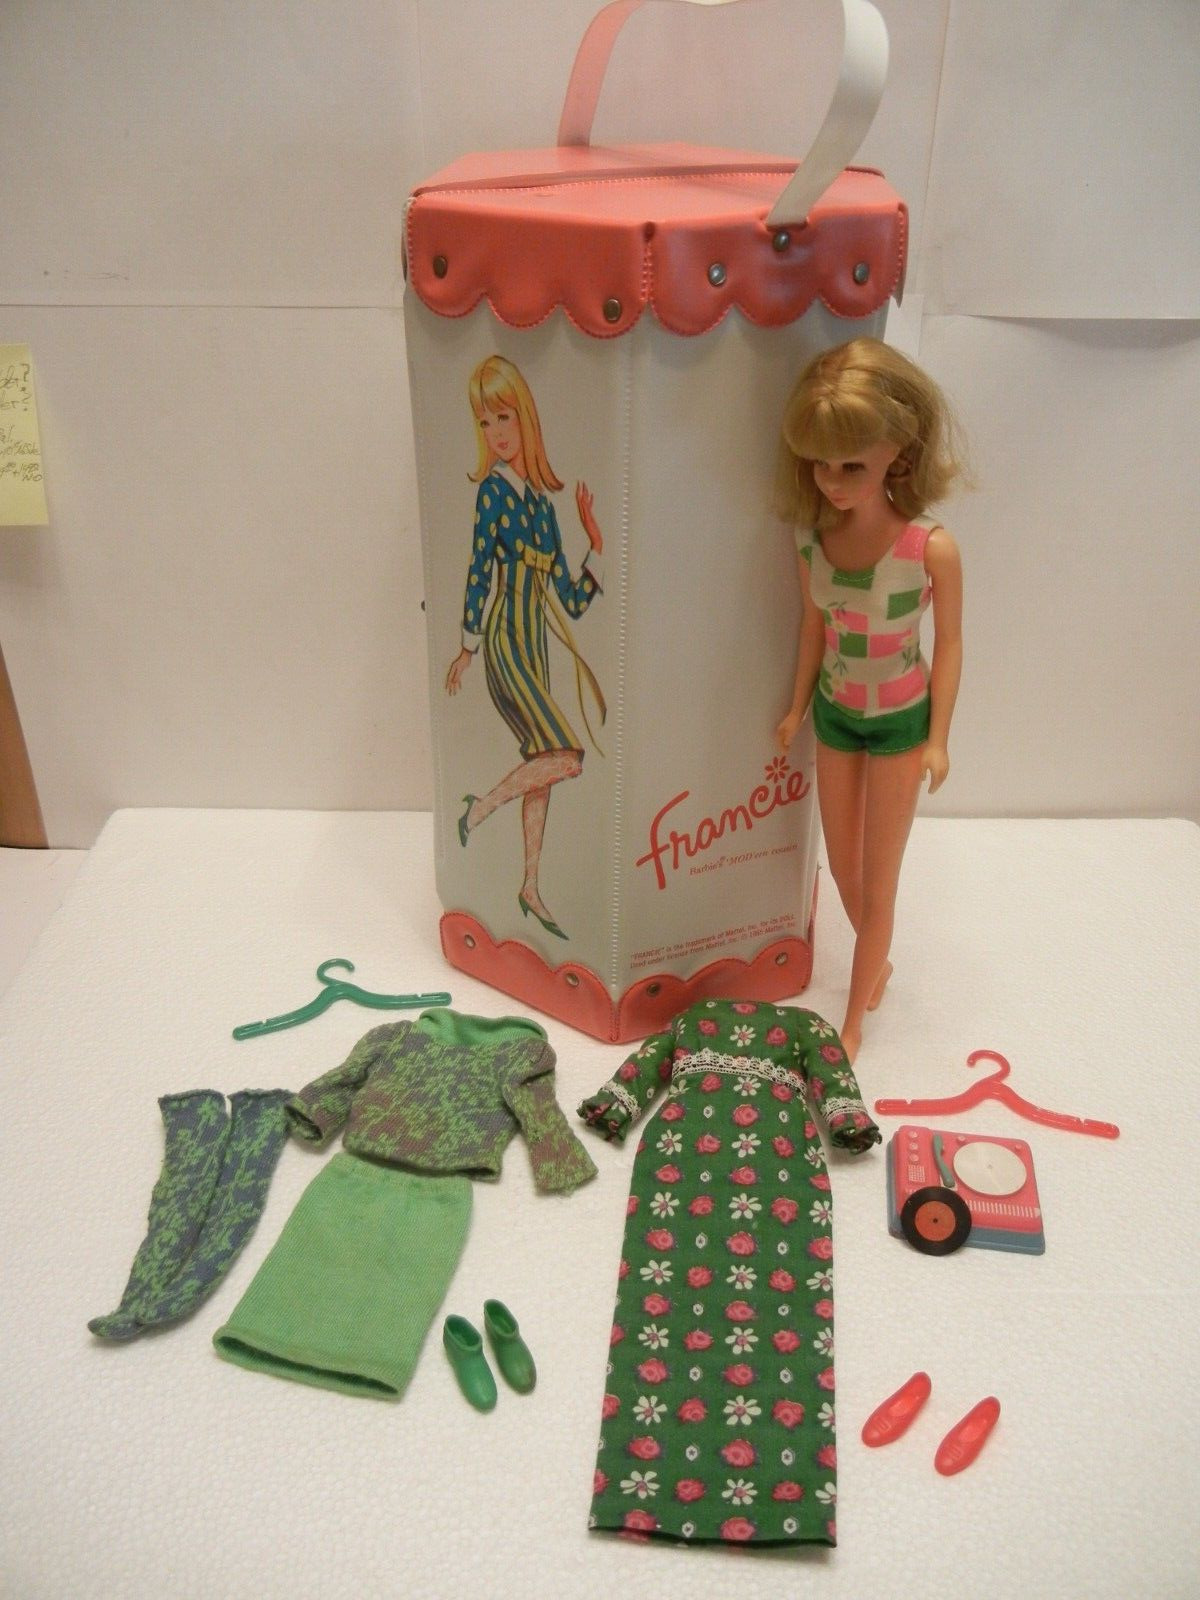 VTG BARBIE FRANCIE CARRYING CASE FRANCIE DOLL IN OUTFIT #1130 ALSO #1267 & 1250